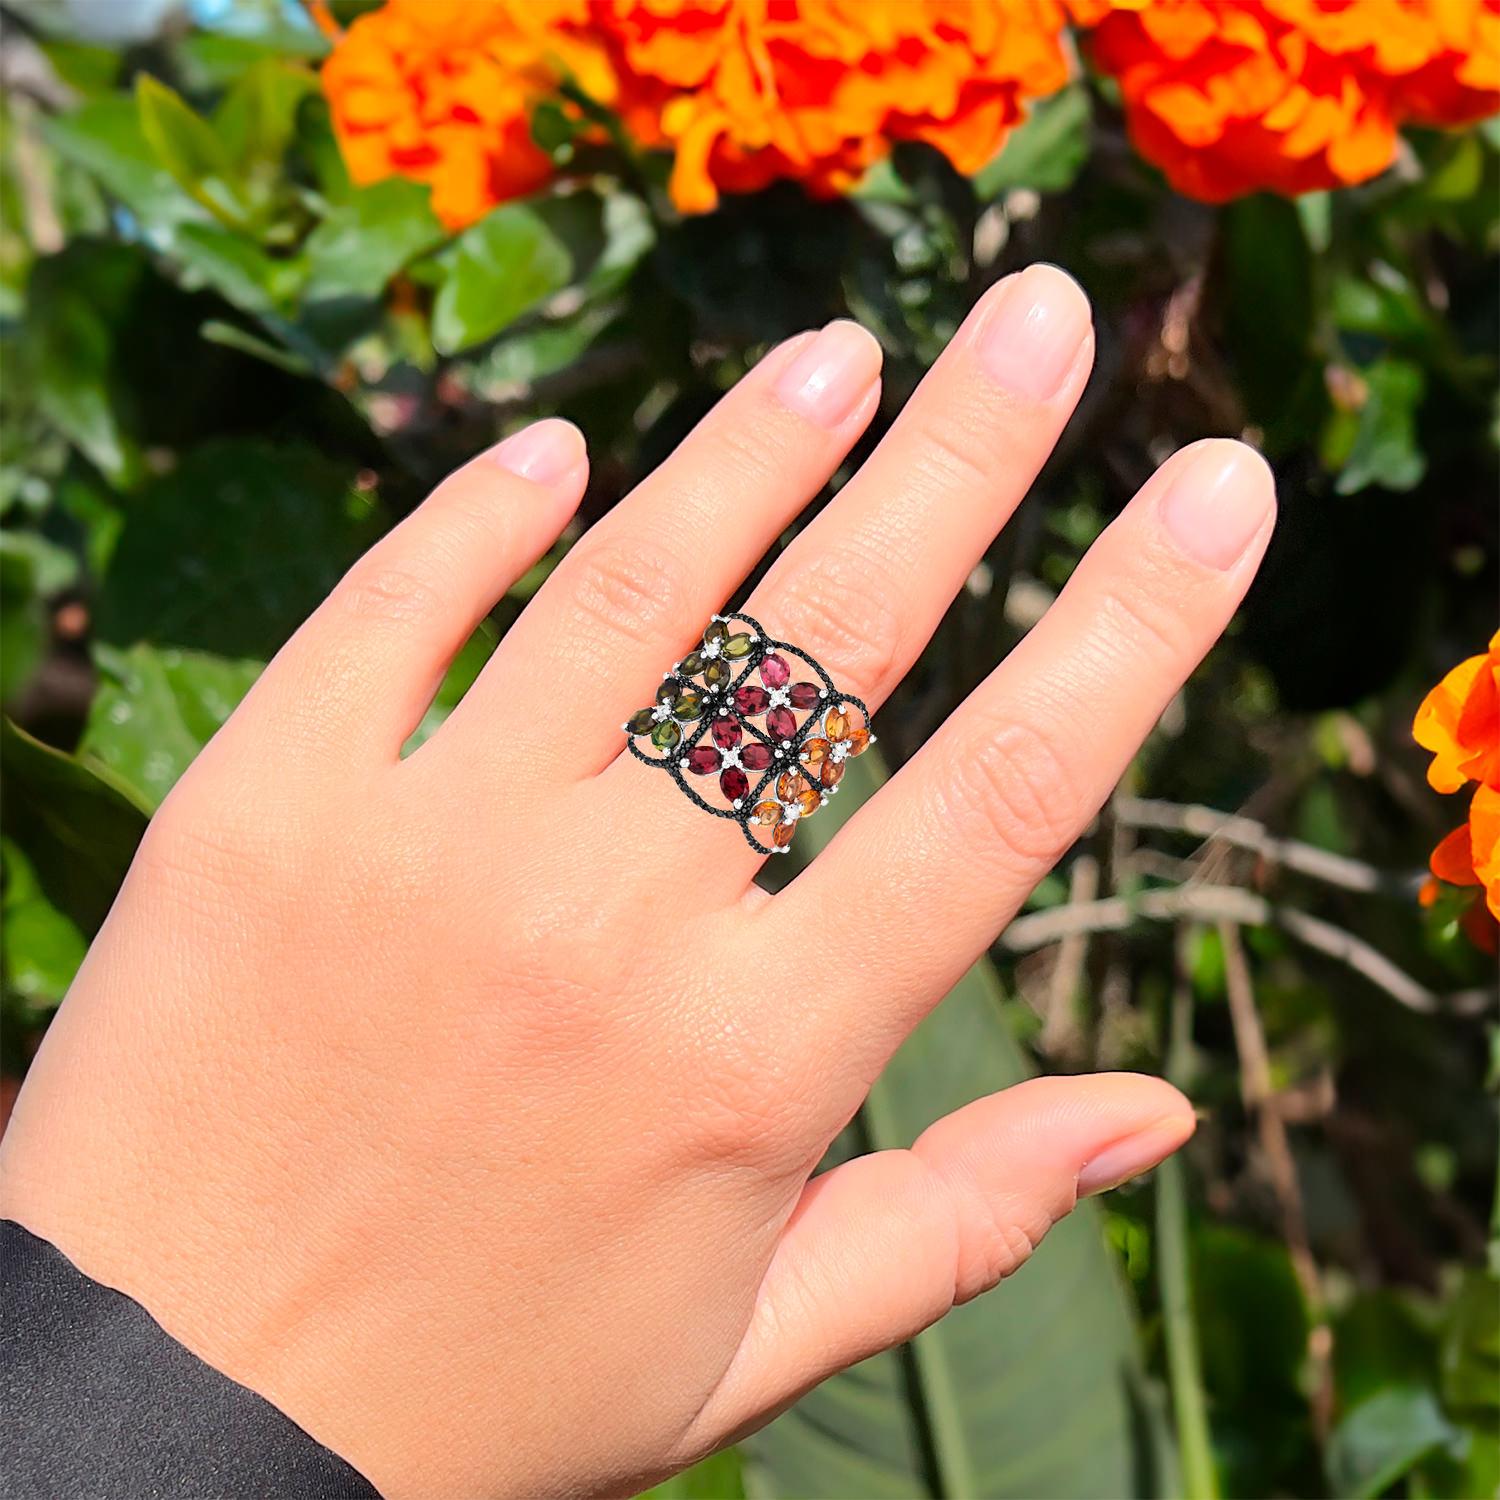 Contemporary Multicolor Tourmaline Ring With White Topazes and Black Spinels 8.38 Carats For Sale